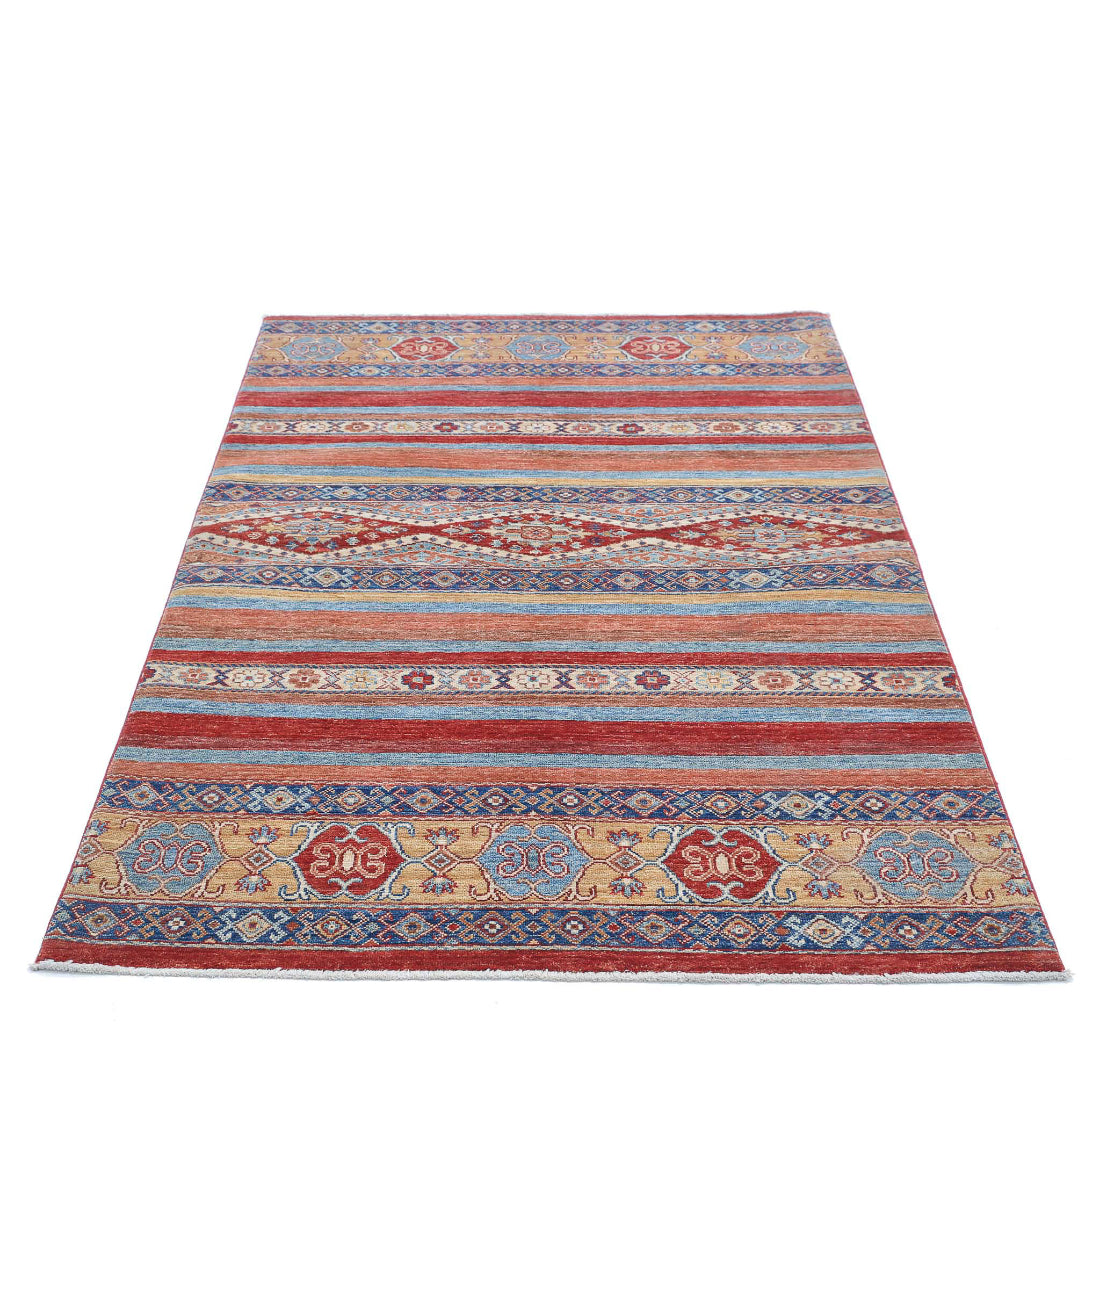 Hand Knotted Khurjeen Wool Rug - 4'1'' x 6'0'' 4'1'' x 6'0'' (123 X 180) / Multi / Multi